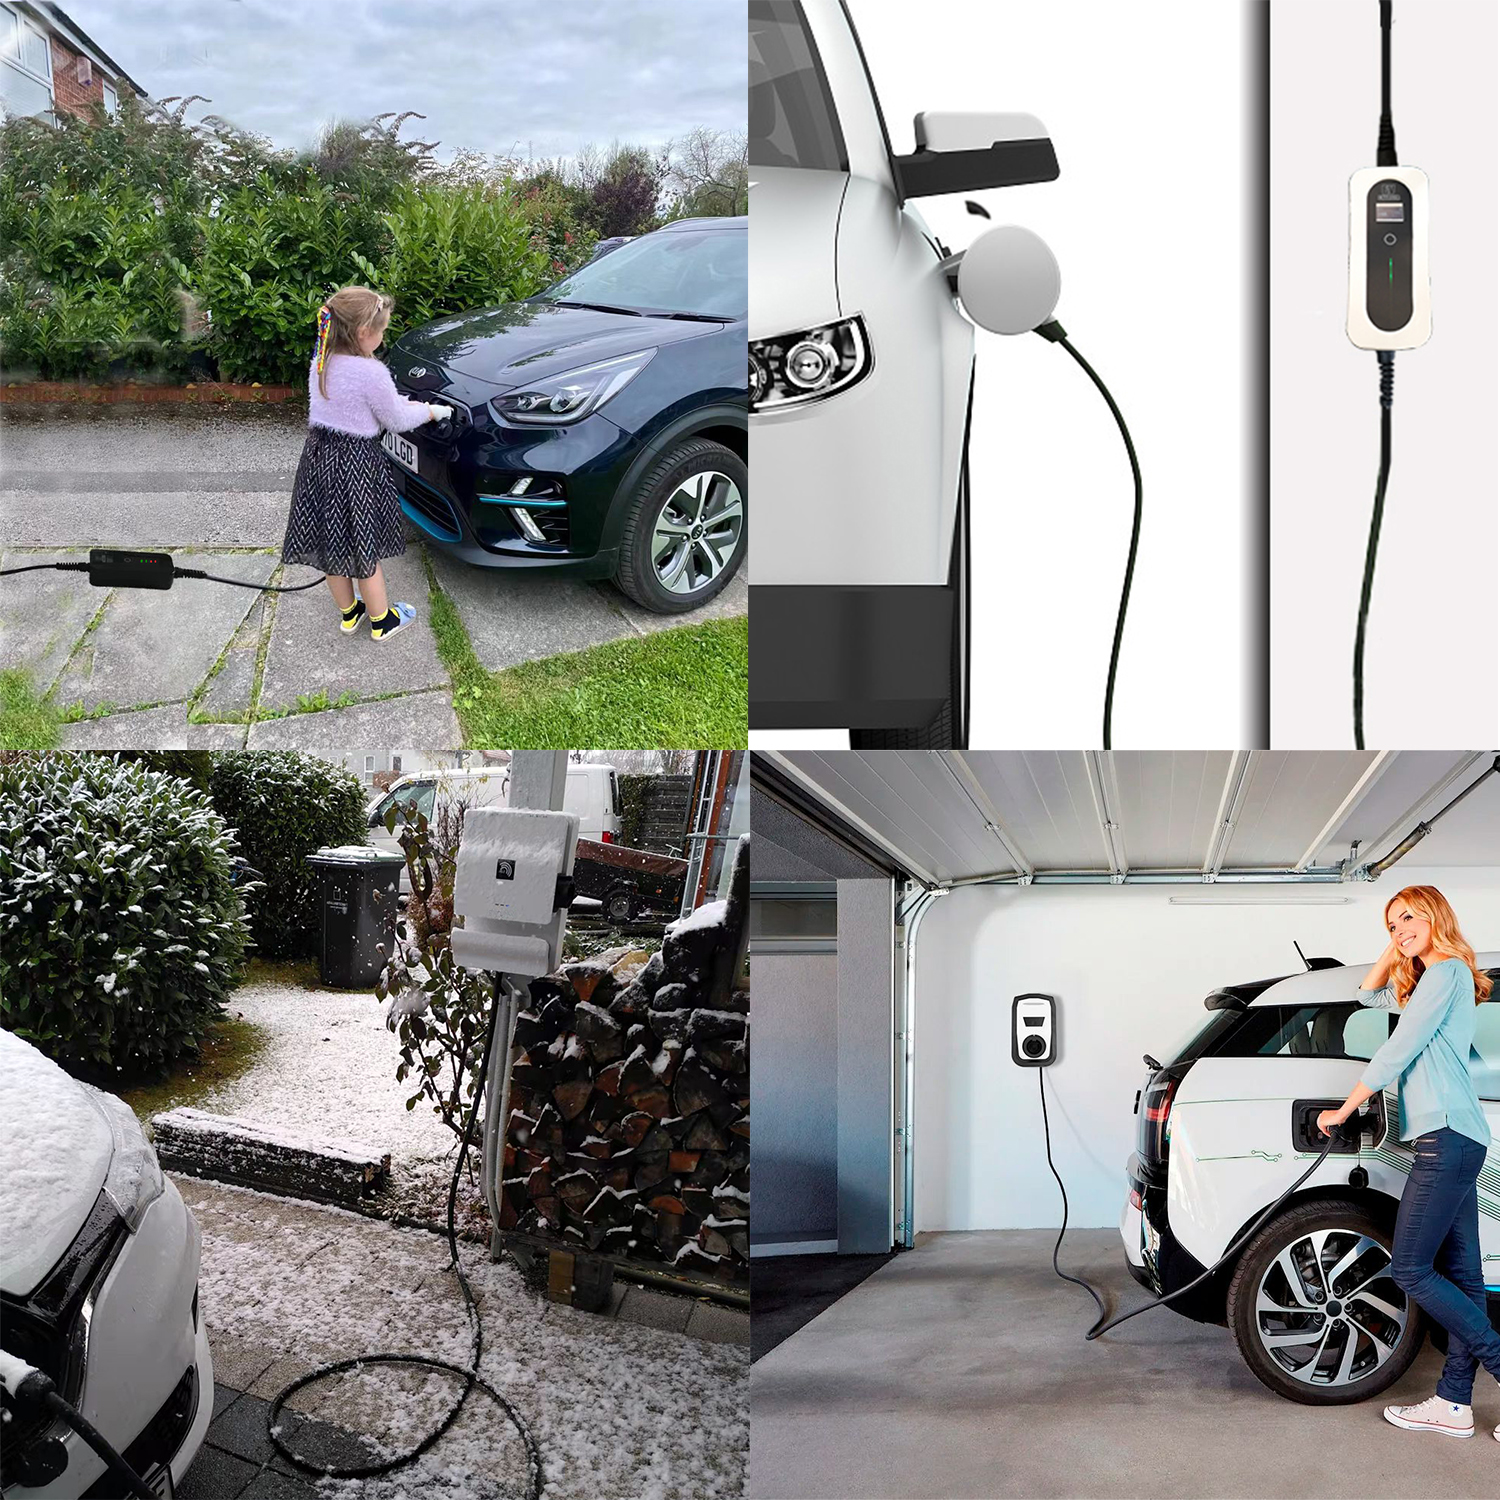 How is portable EV charger different from home EV charger？